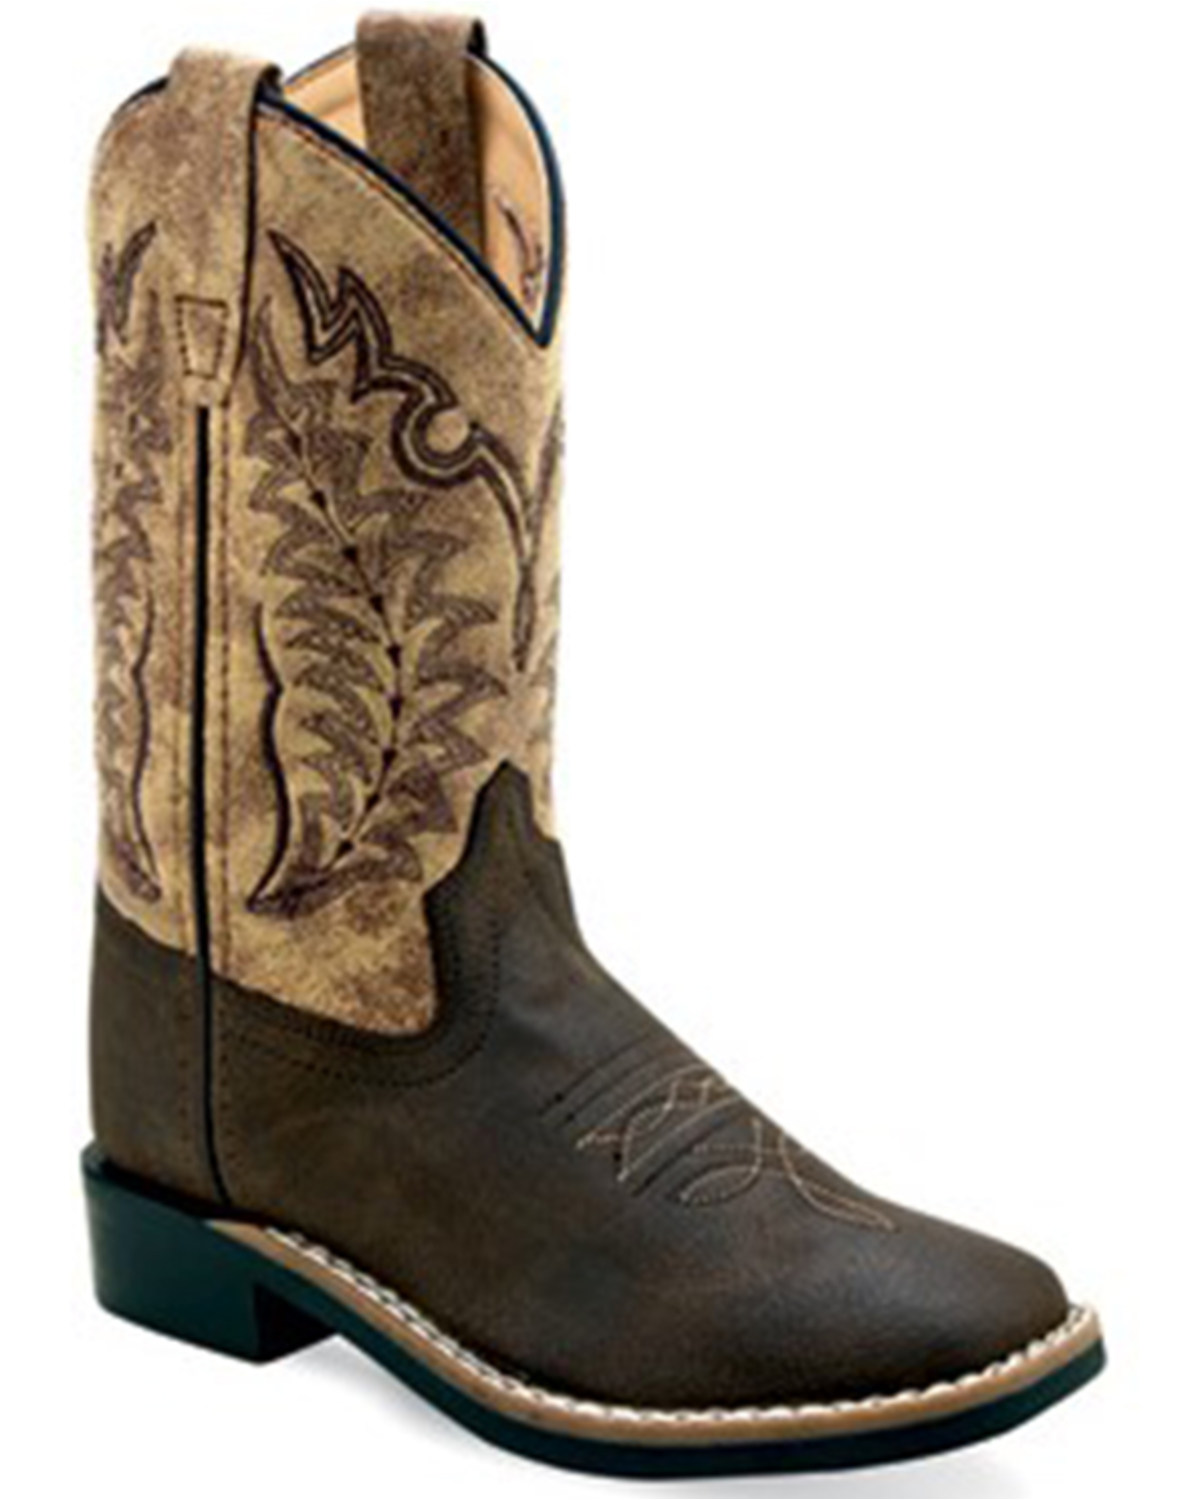 Old West Boys' Vintage Western Boots - Broad Square Toe